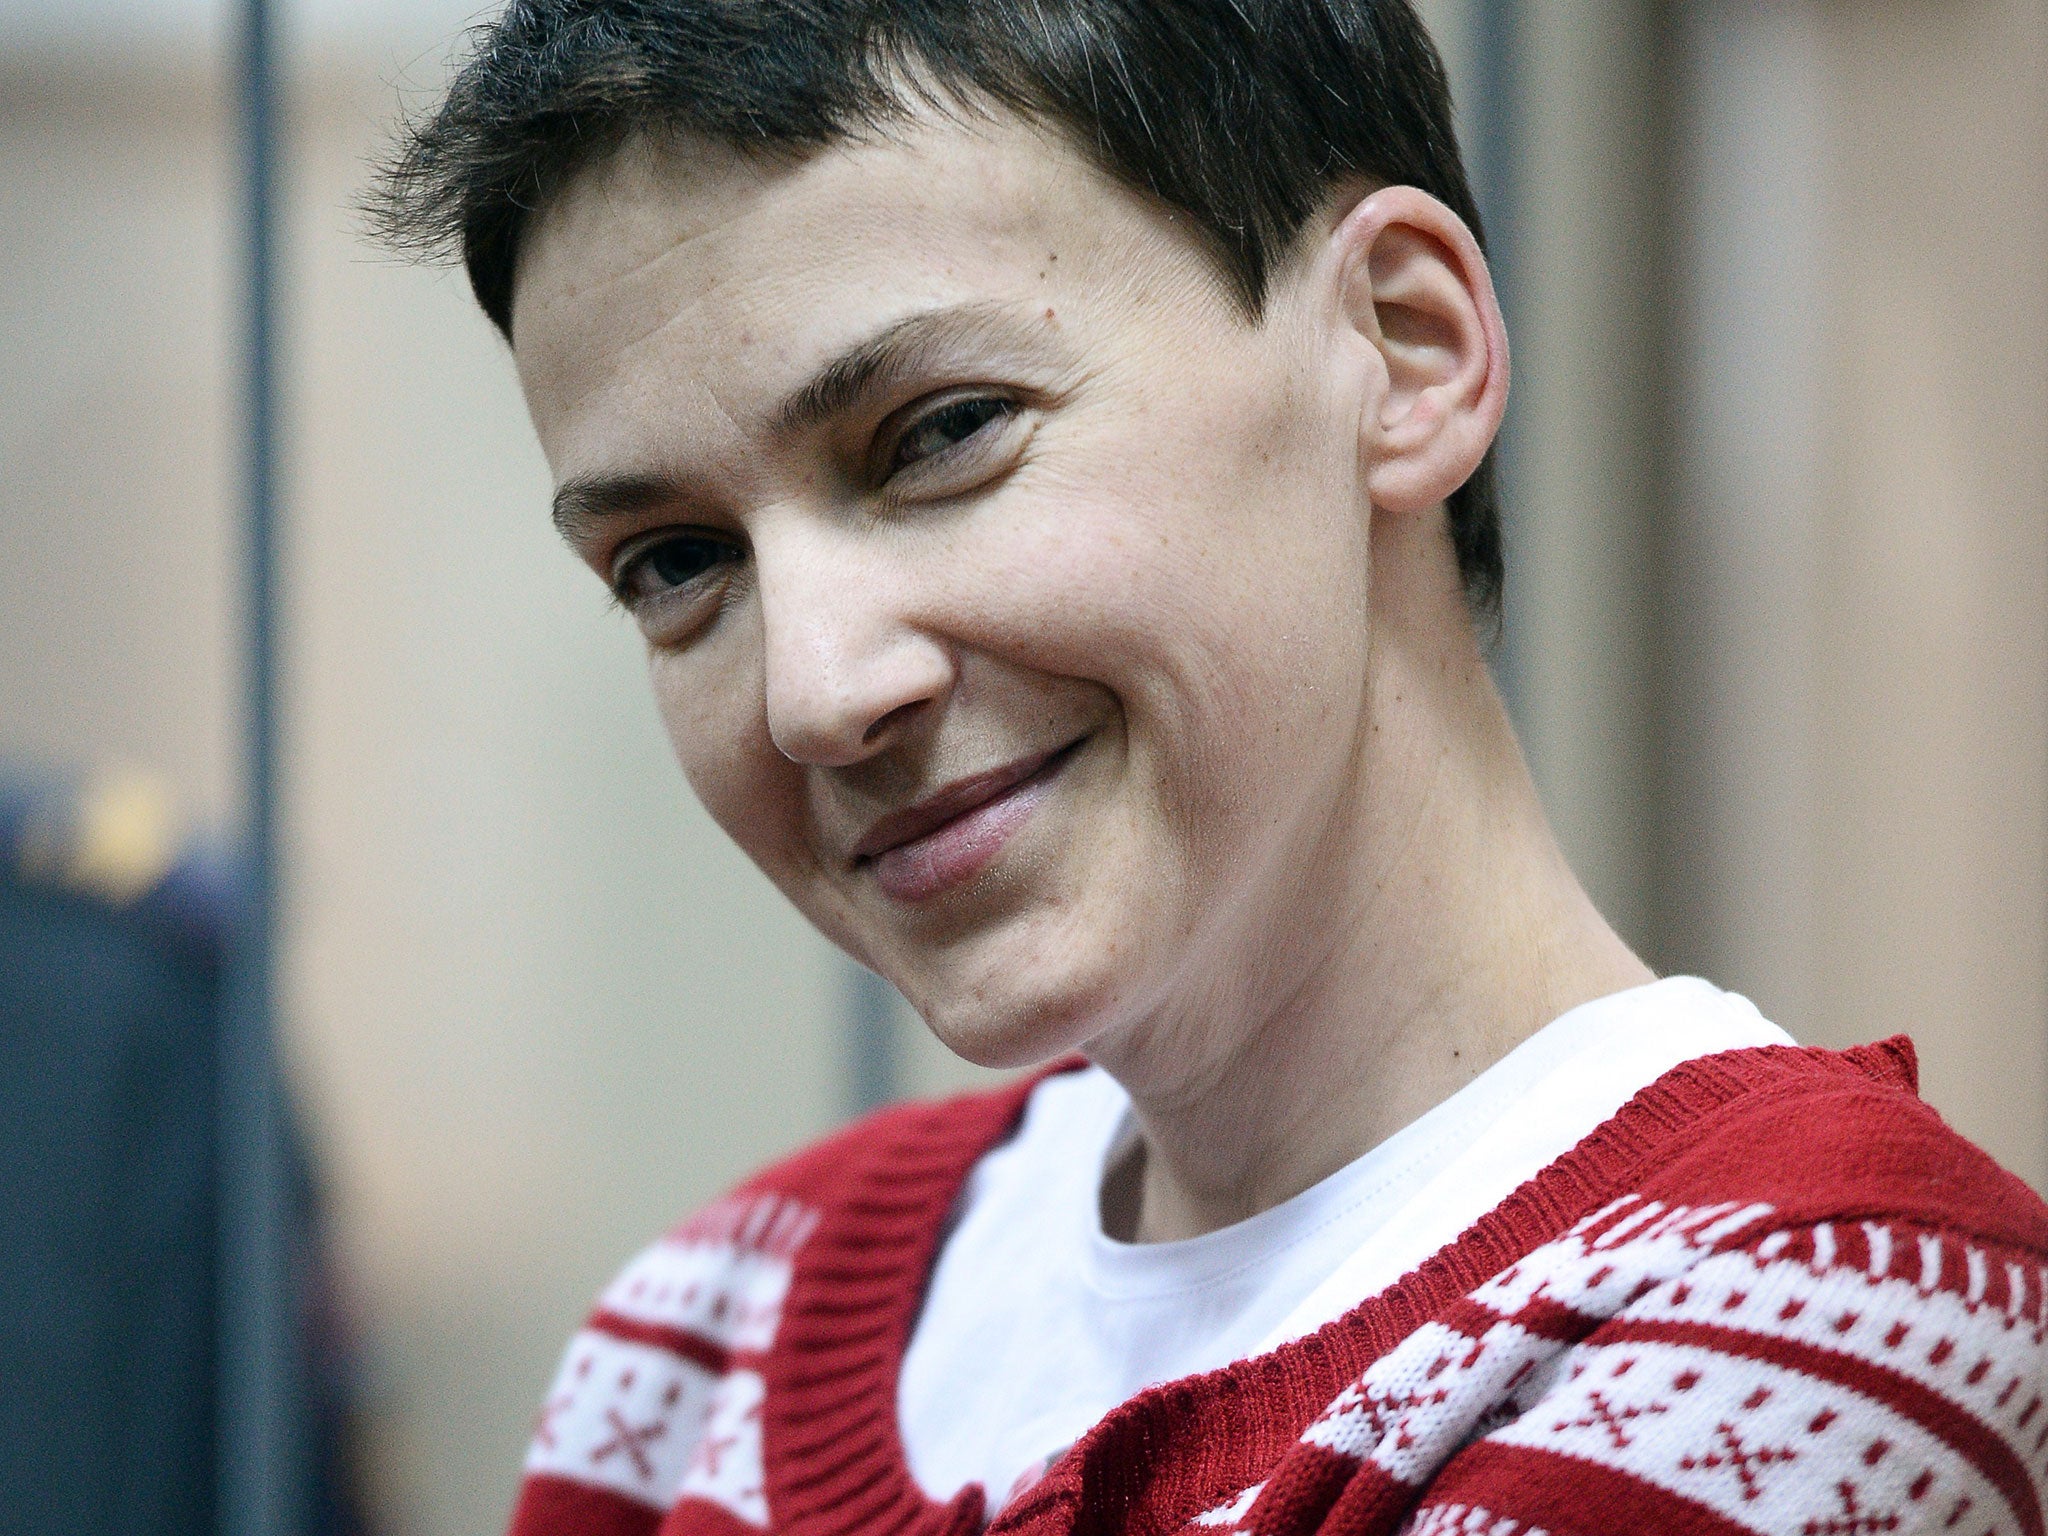 Ukrainian airforce officer Nadezhda (Nadia) Savchenko smiles inside a defendants' cage as she attends a hearing at the Basmanny district court in Moscow on March 4, 2015